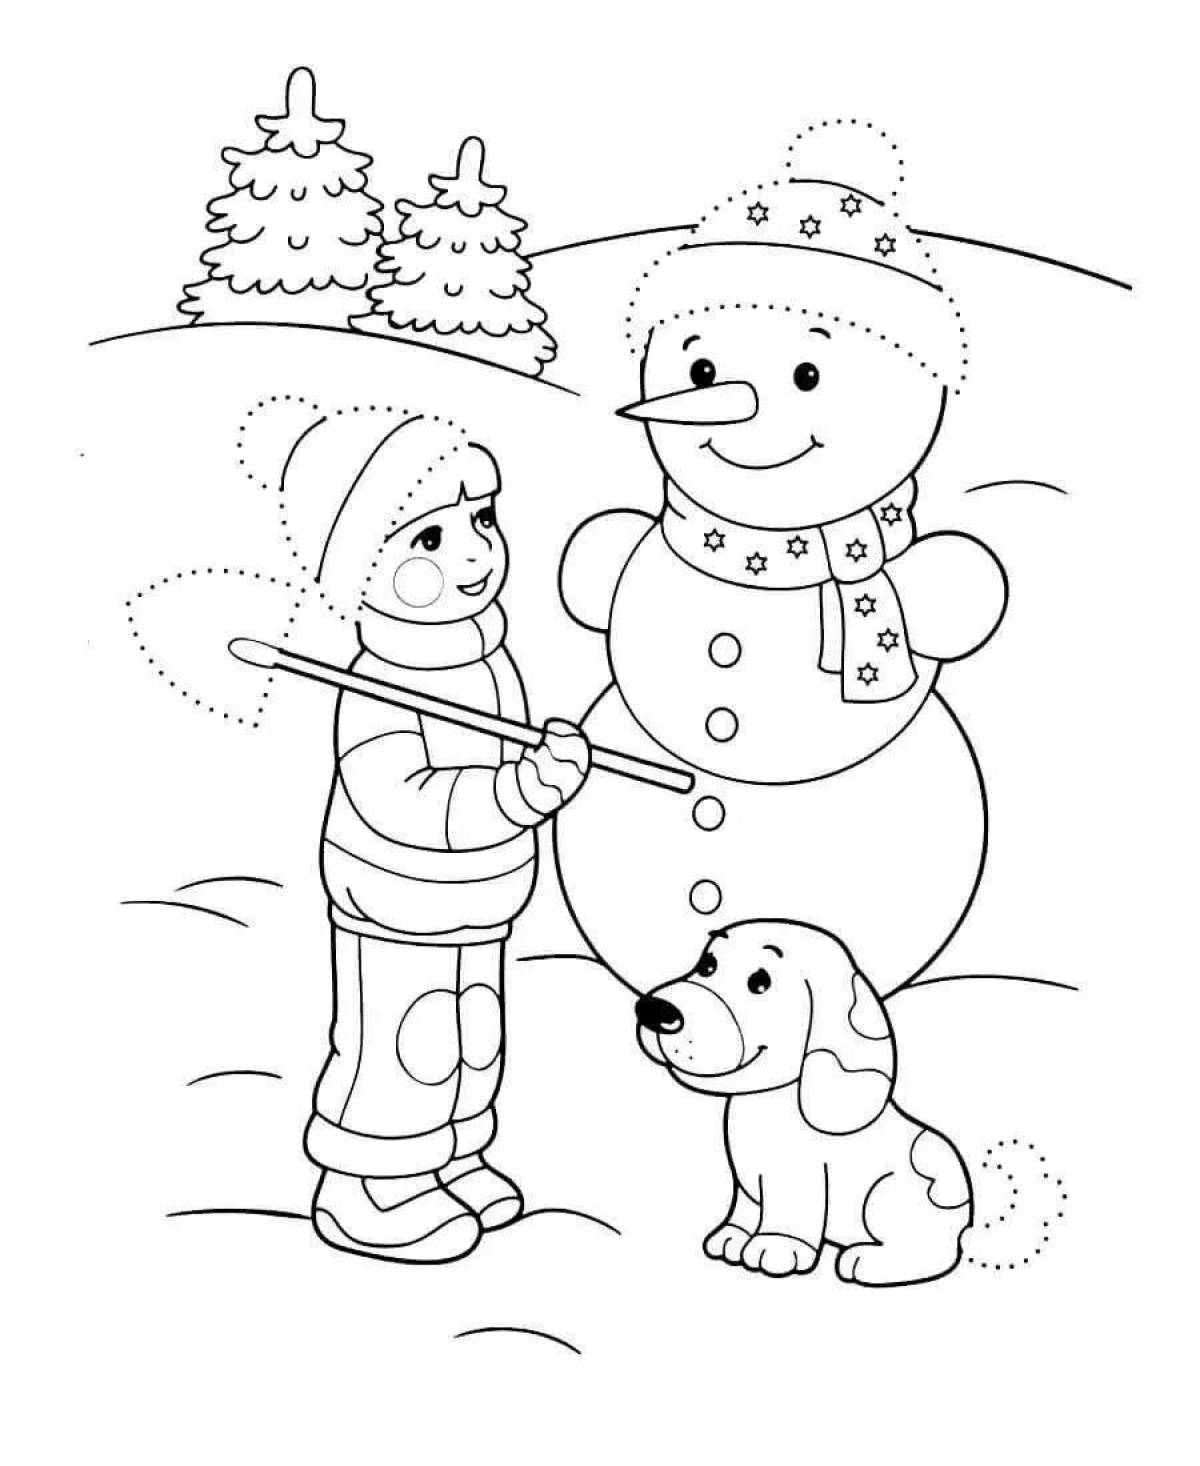 Dreamy winter coloring book for kids 6-7 years old